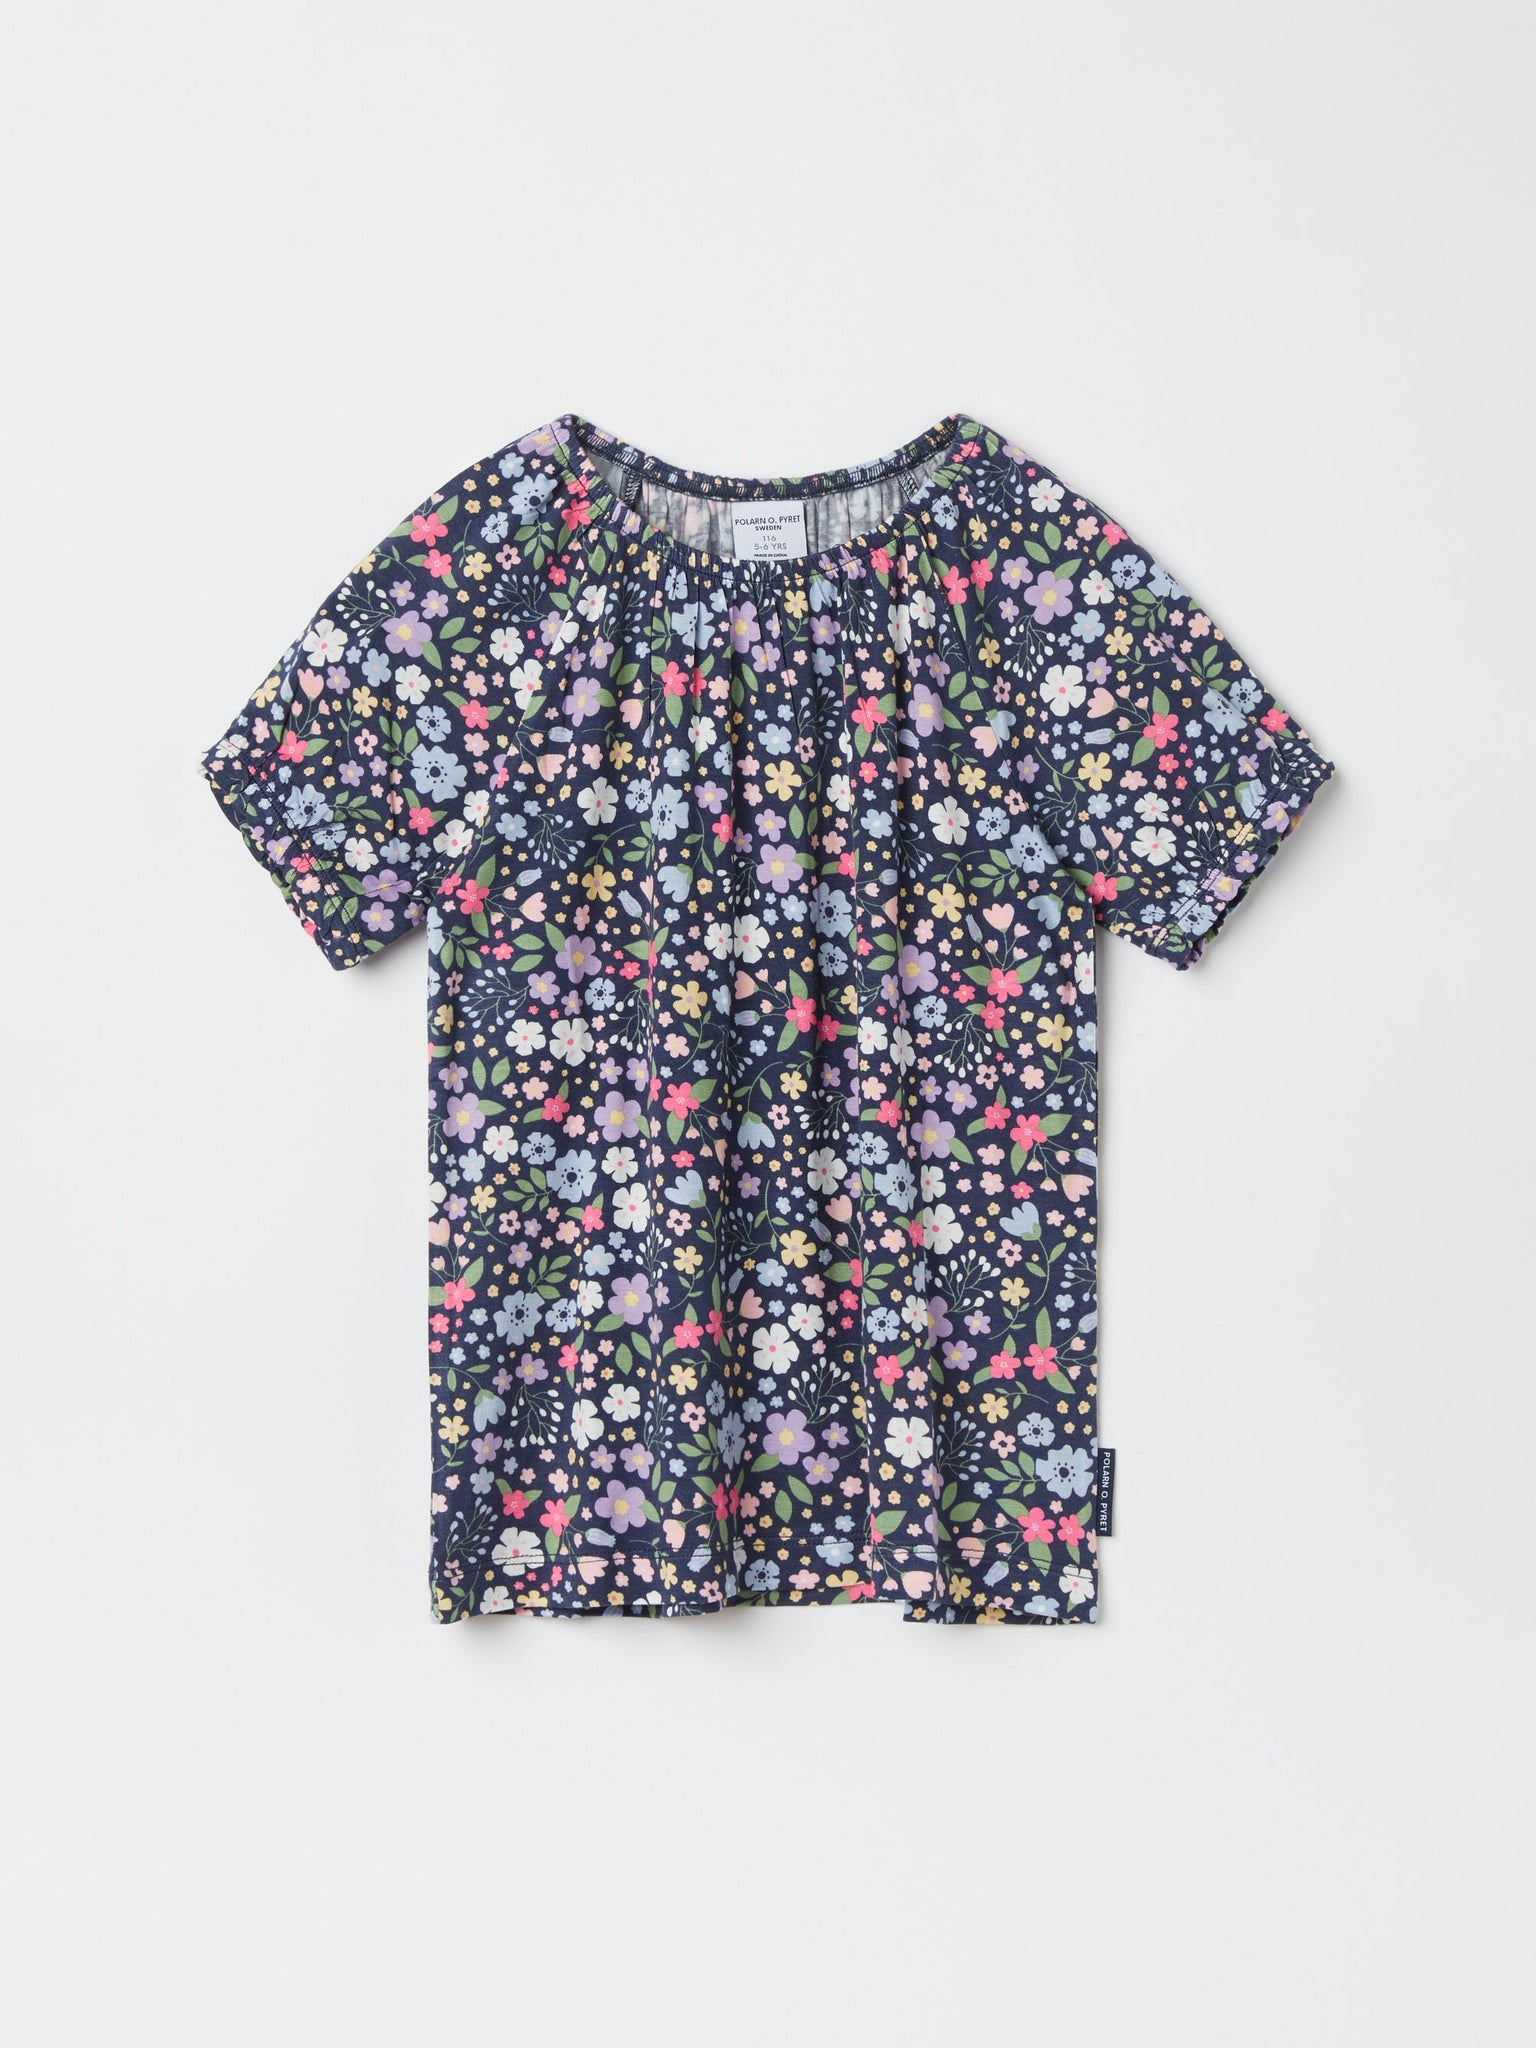 Floral Print Top from the Polarn O. Pyret kidswear collection. Ethically produced kids clothing.